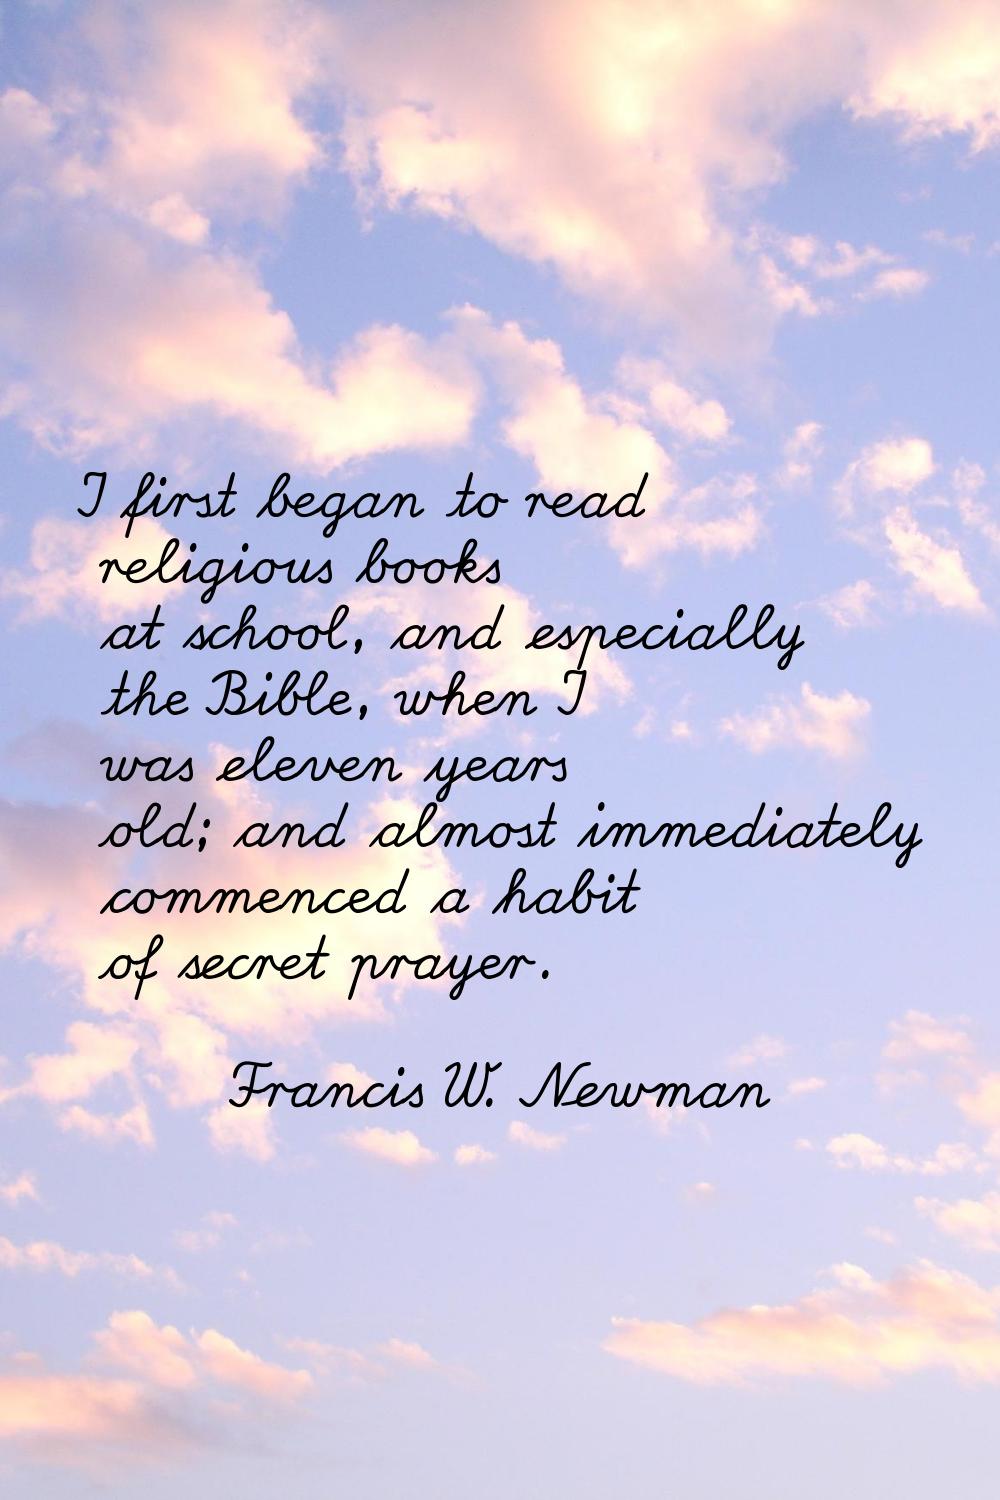 I first began to read religious books at school, and especially the Bible, when I was eleven years 